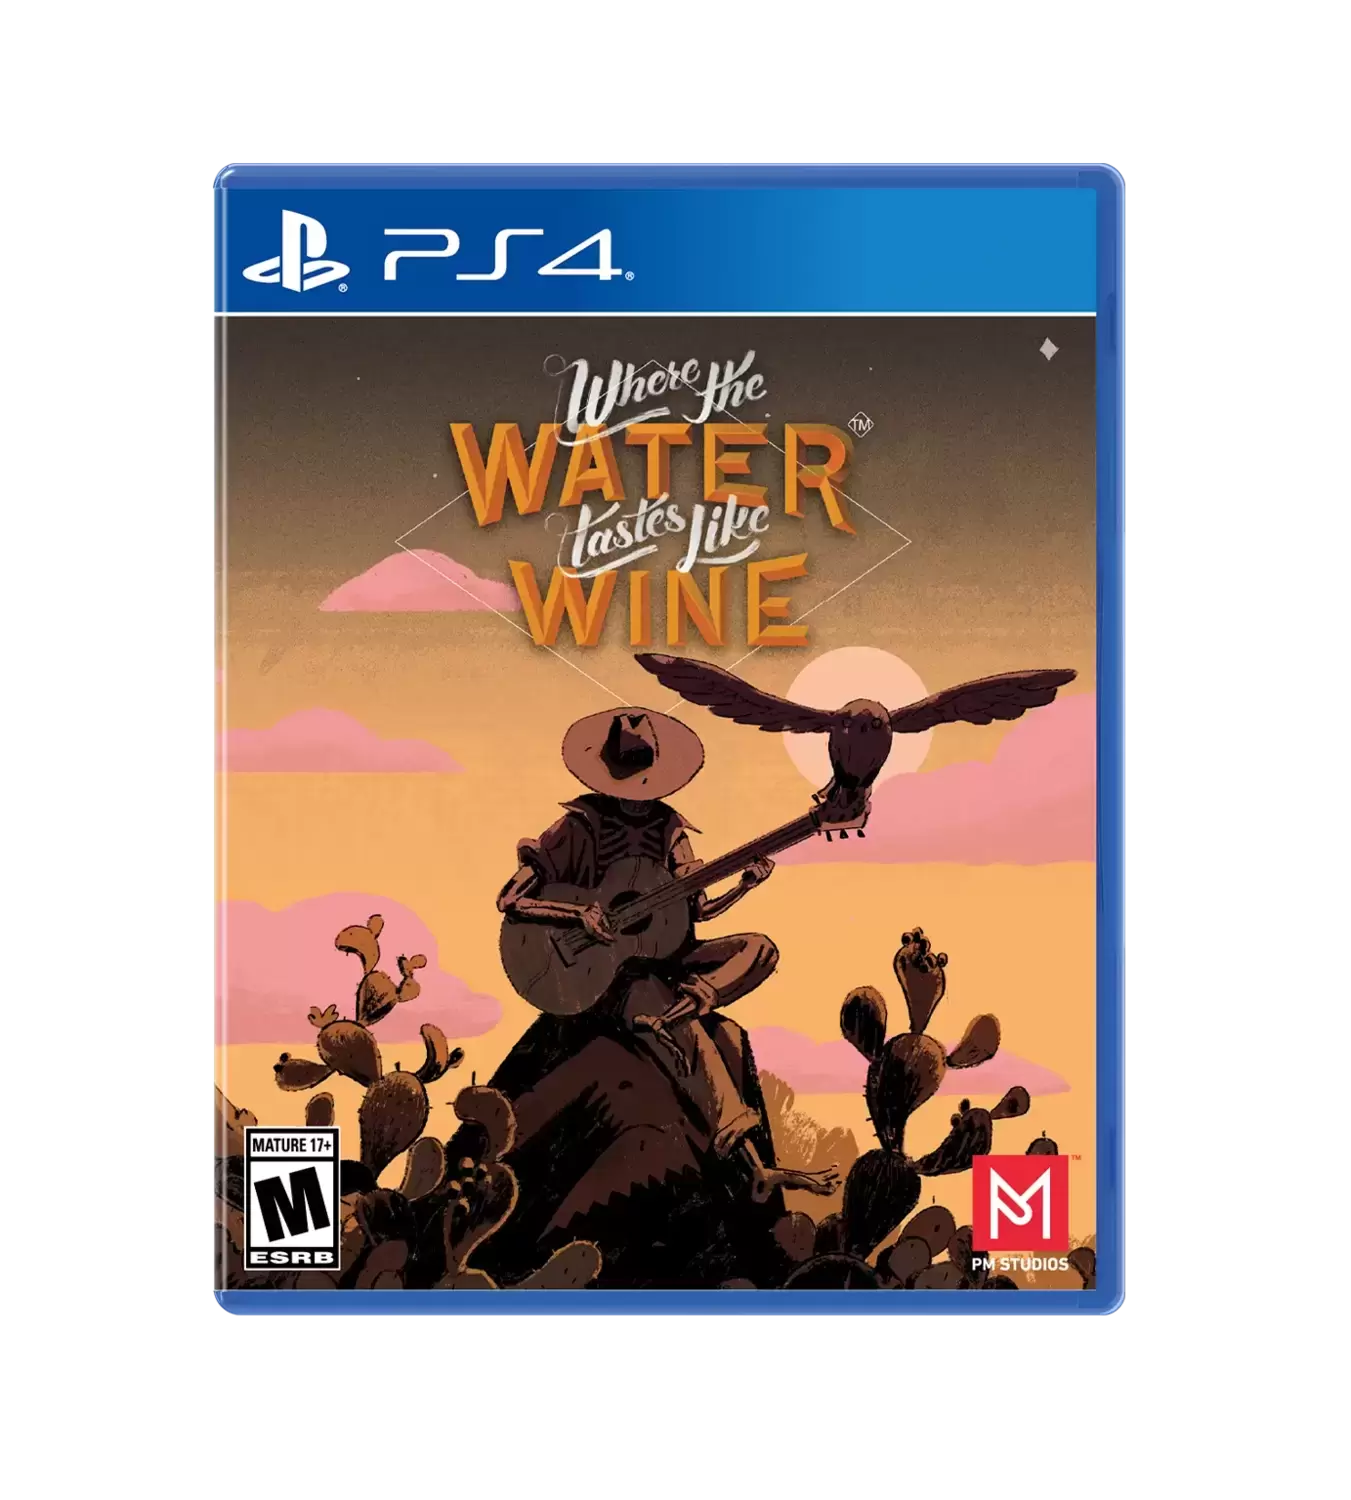 PS4 Games - Where The Water Tastes Like Wine